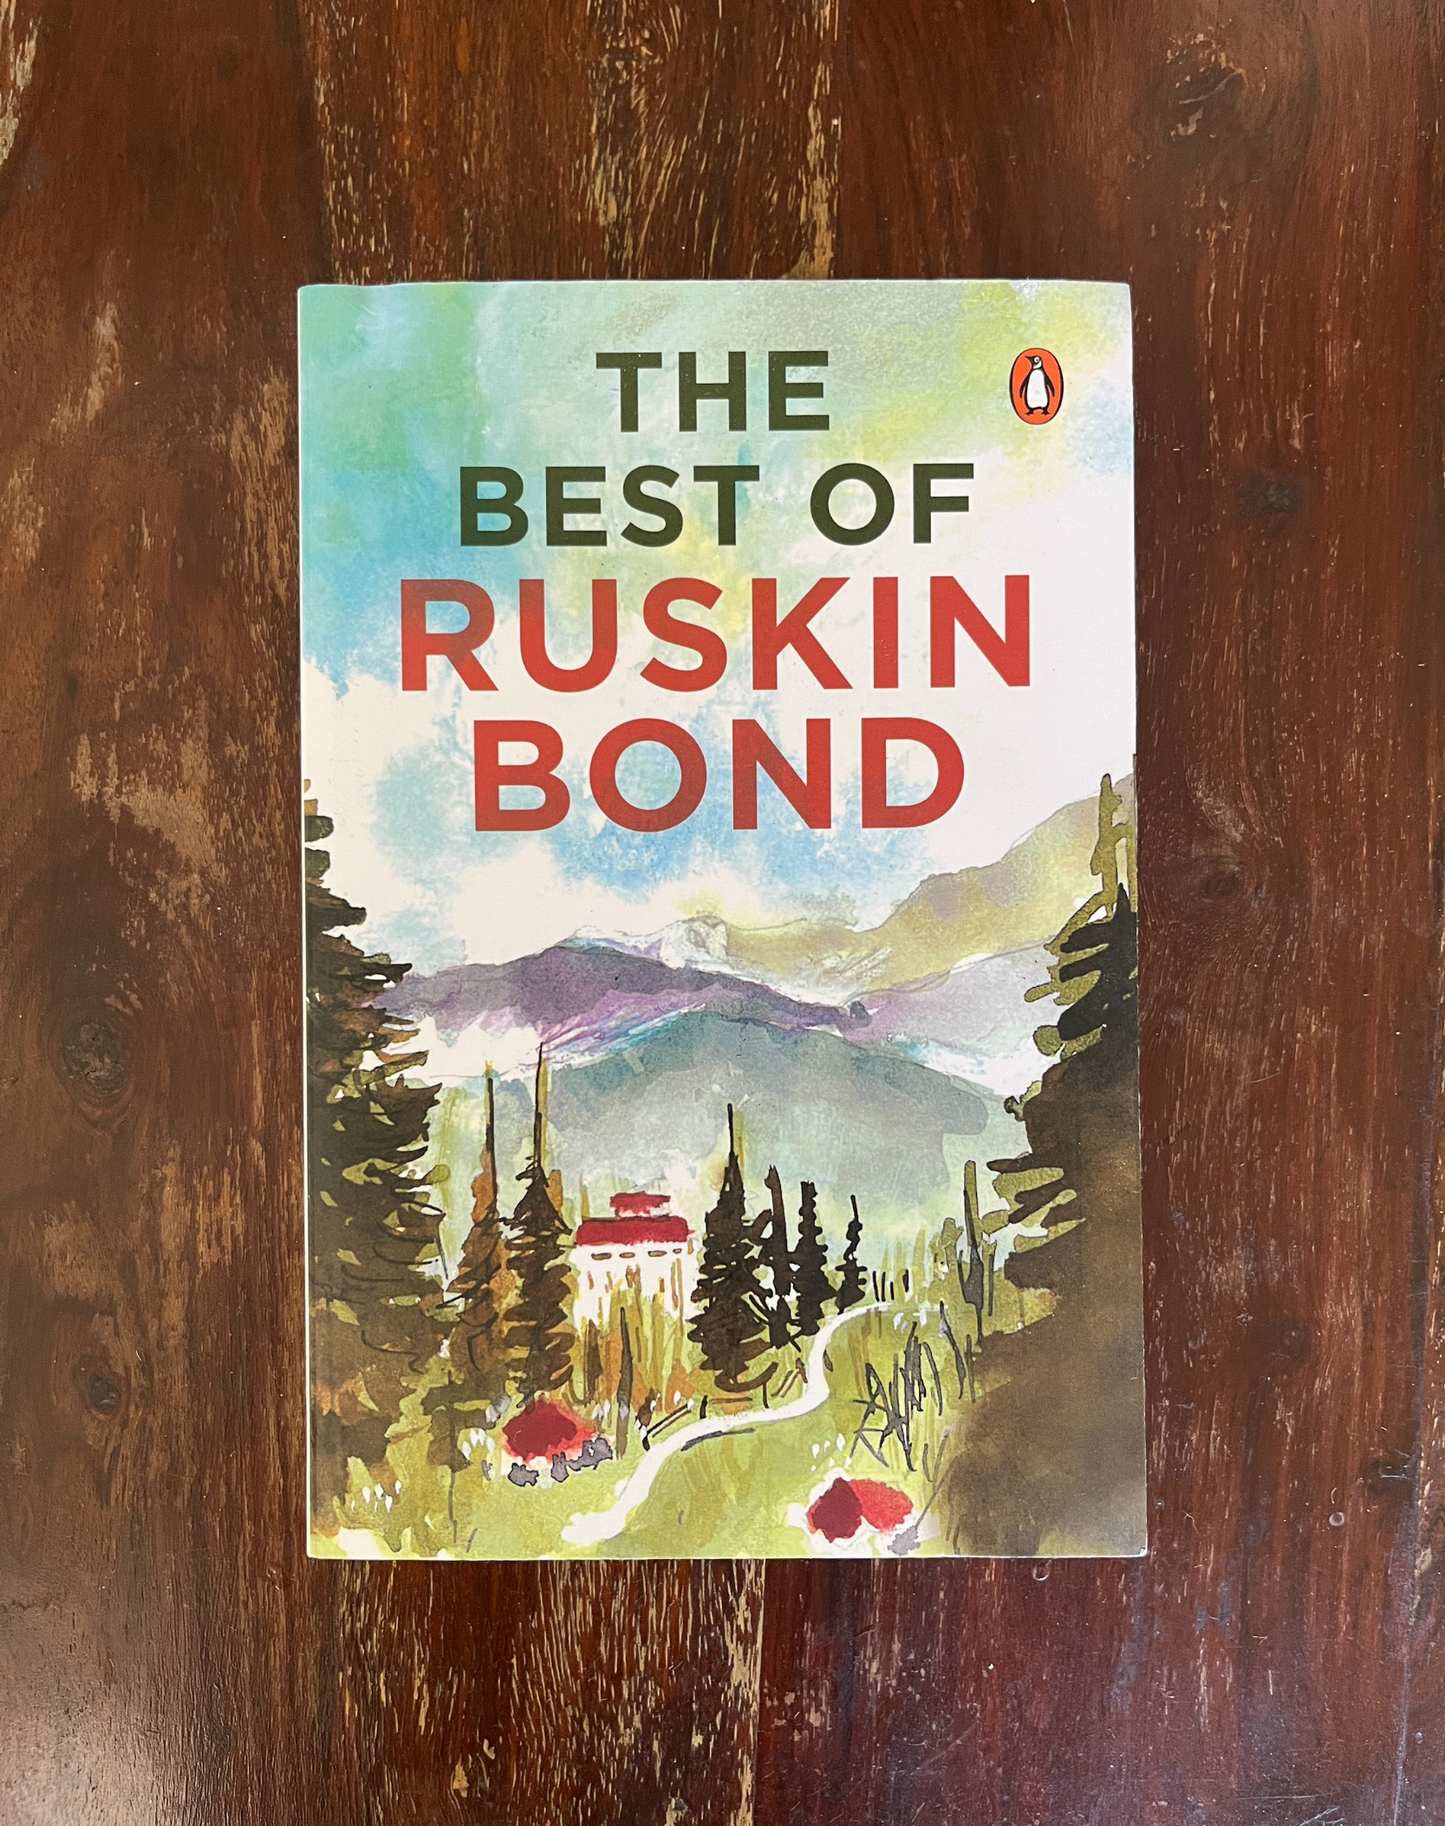 The Best of Ruskin Bond (The Ultimate Collection of Ruskin Bond's Best Stories Poems and Essays including Delhi Is Not Far)  - Ruskin Bond